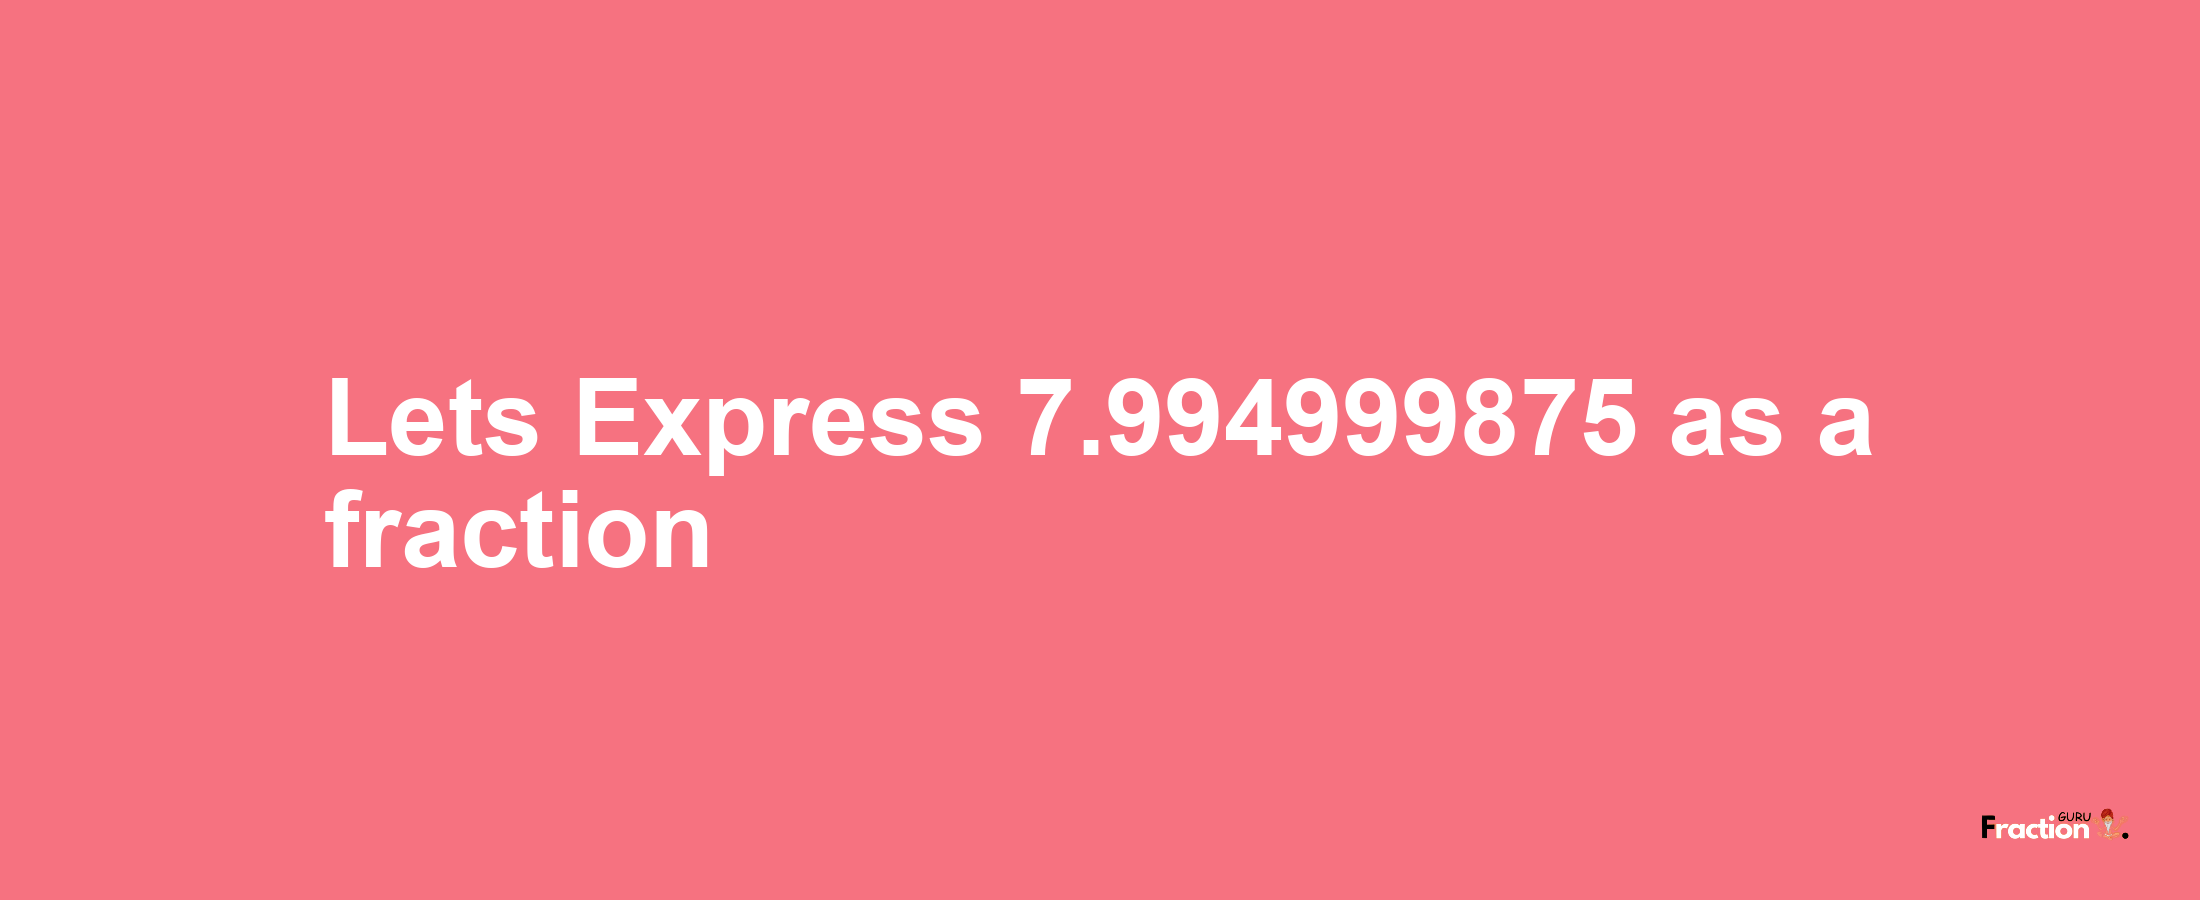 Lets Express 7.994999875 as afraction